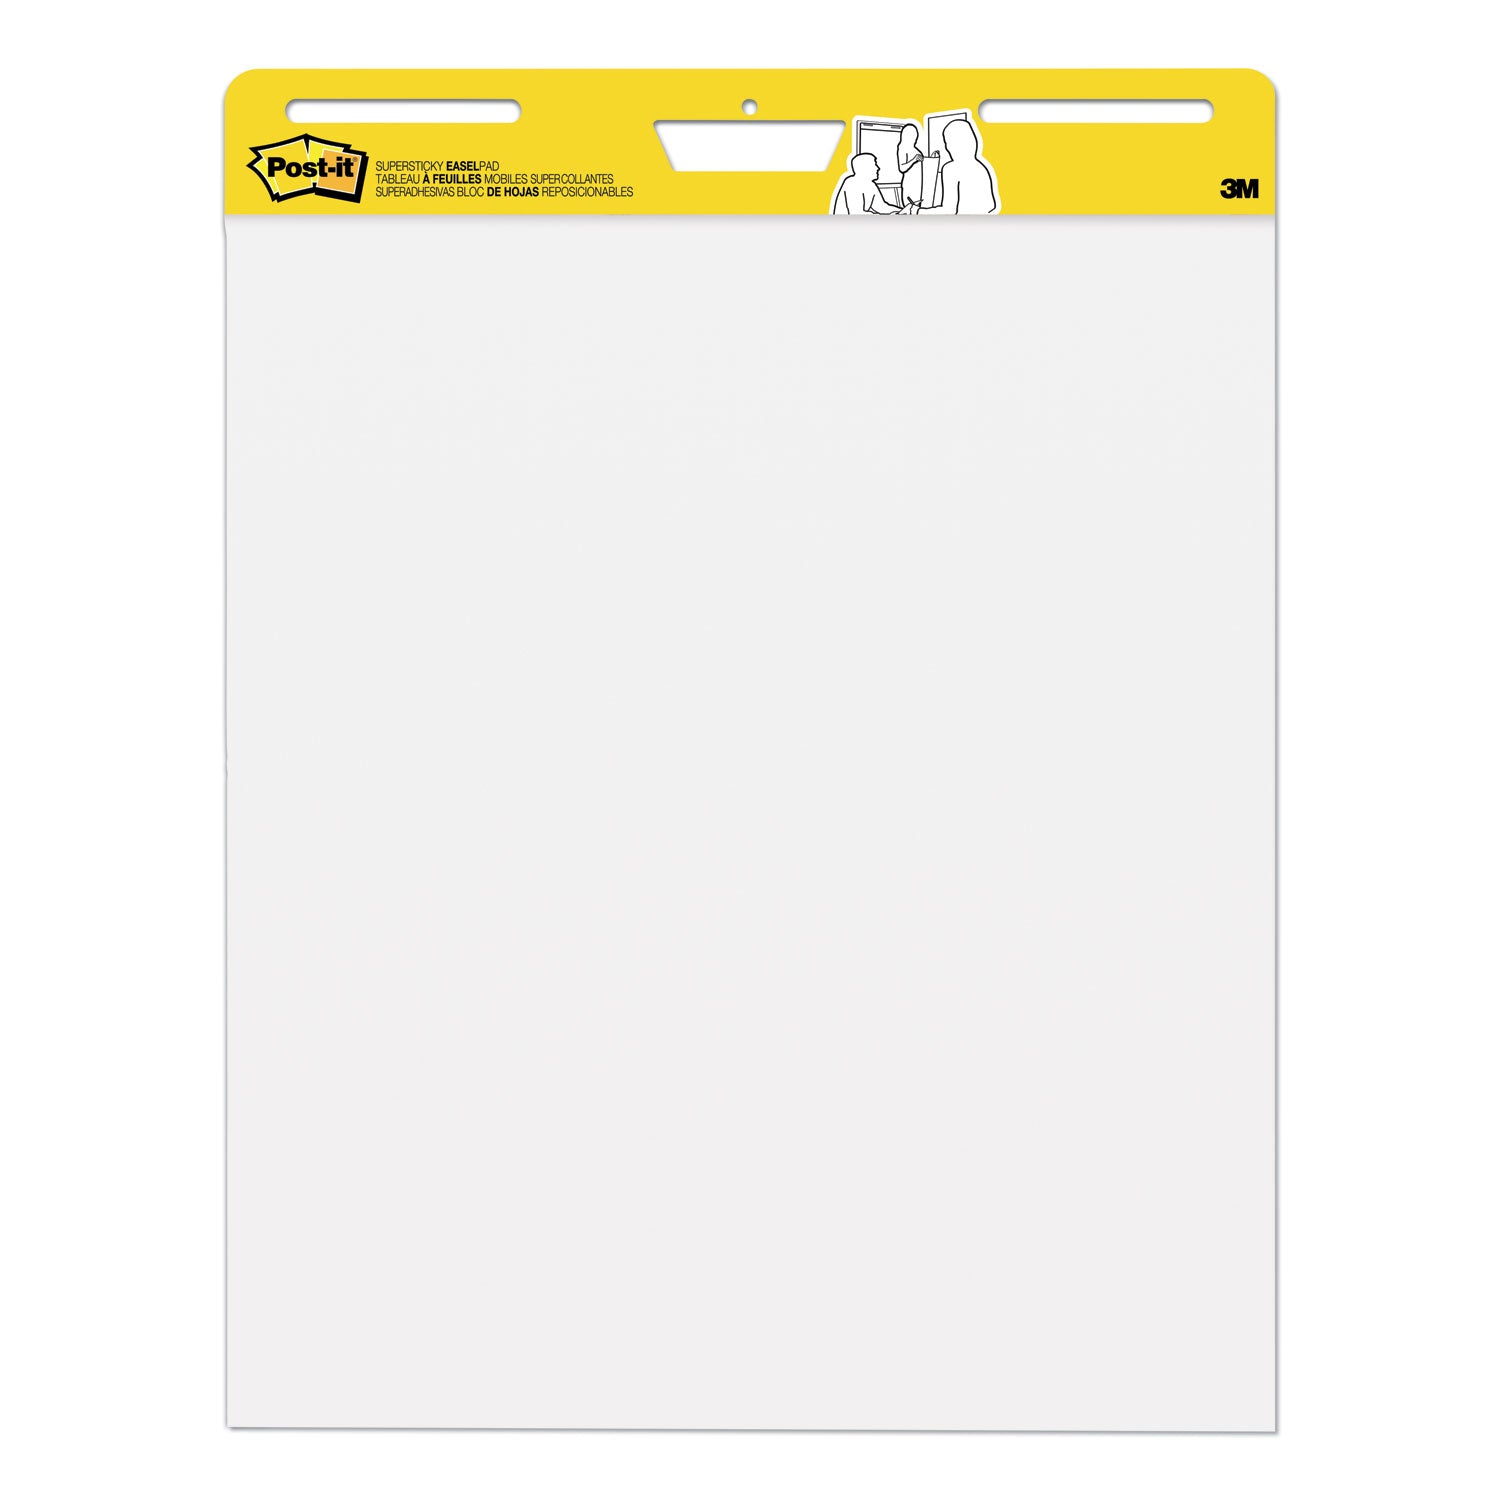 Vertical-Orientation Self-Stick Easel Pads, Unruled, 25 x 30, White, 30 Sheets, 2/Carton - 